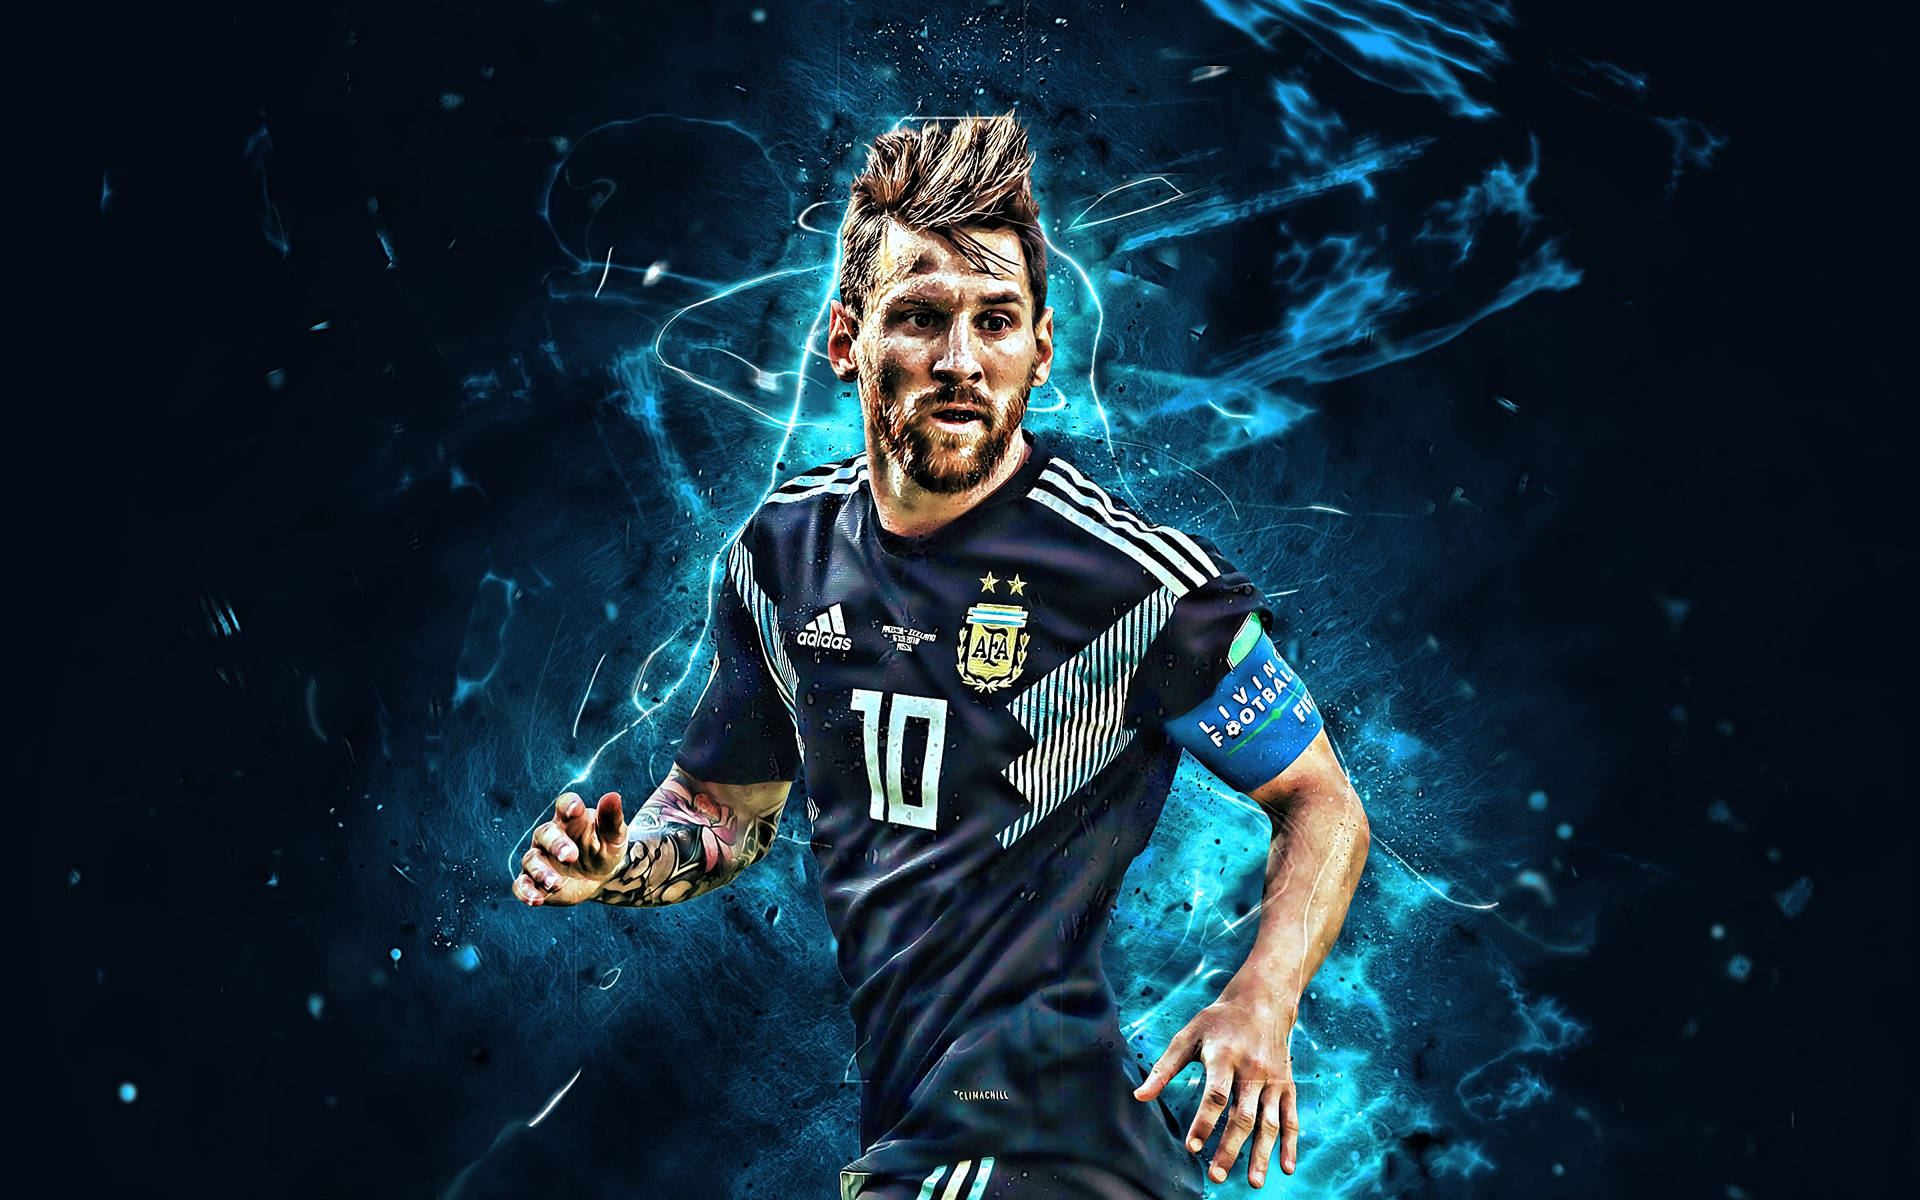 Free Messi 2020 Wallpaper Downloads, [100+] Messi 2020 Wallpapers for FREE  